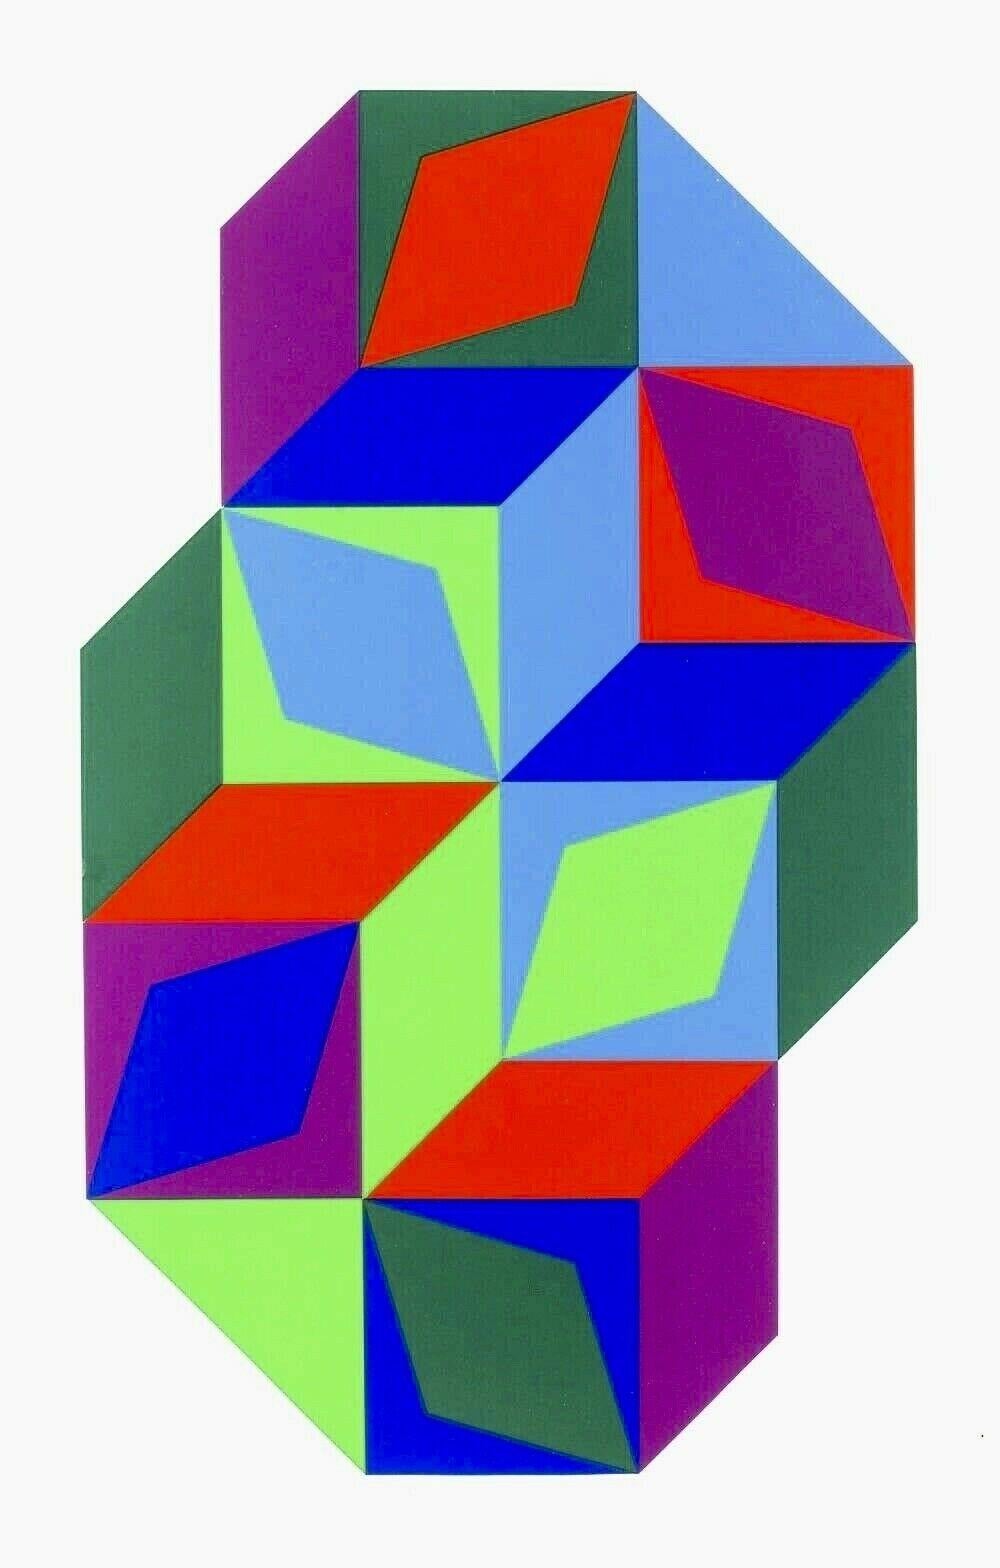 Artist: Victor Vasarely (1908-1997)
Title: Cover Illustration for the Catalogue, L’Art Livant 1965-1968
Year: 1968
Medium: Silkscreen on wove paper
Edition: 200, plus proofs
Size: 26 x 17.75 inches
Condition: Excellent
Inscription: Signed and